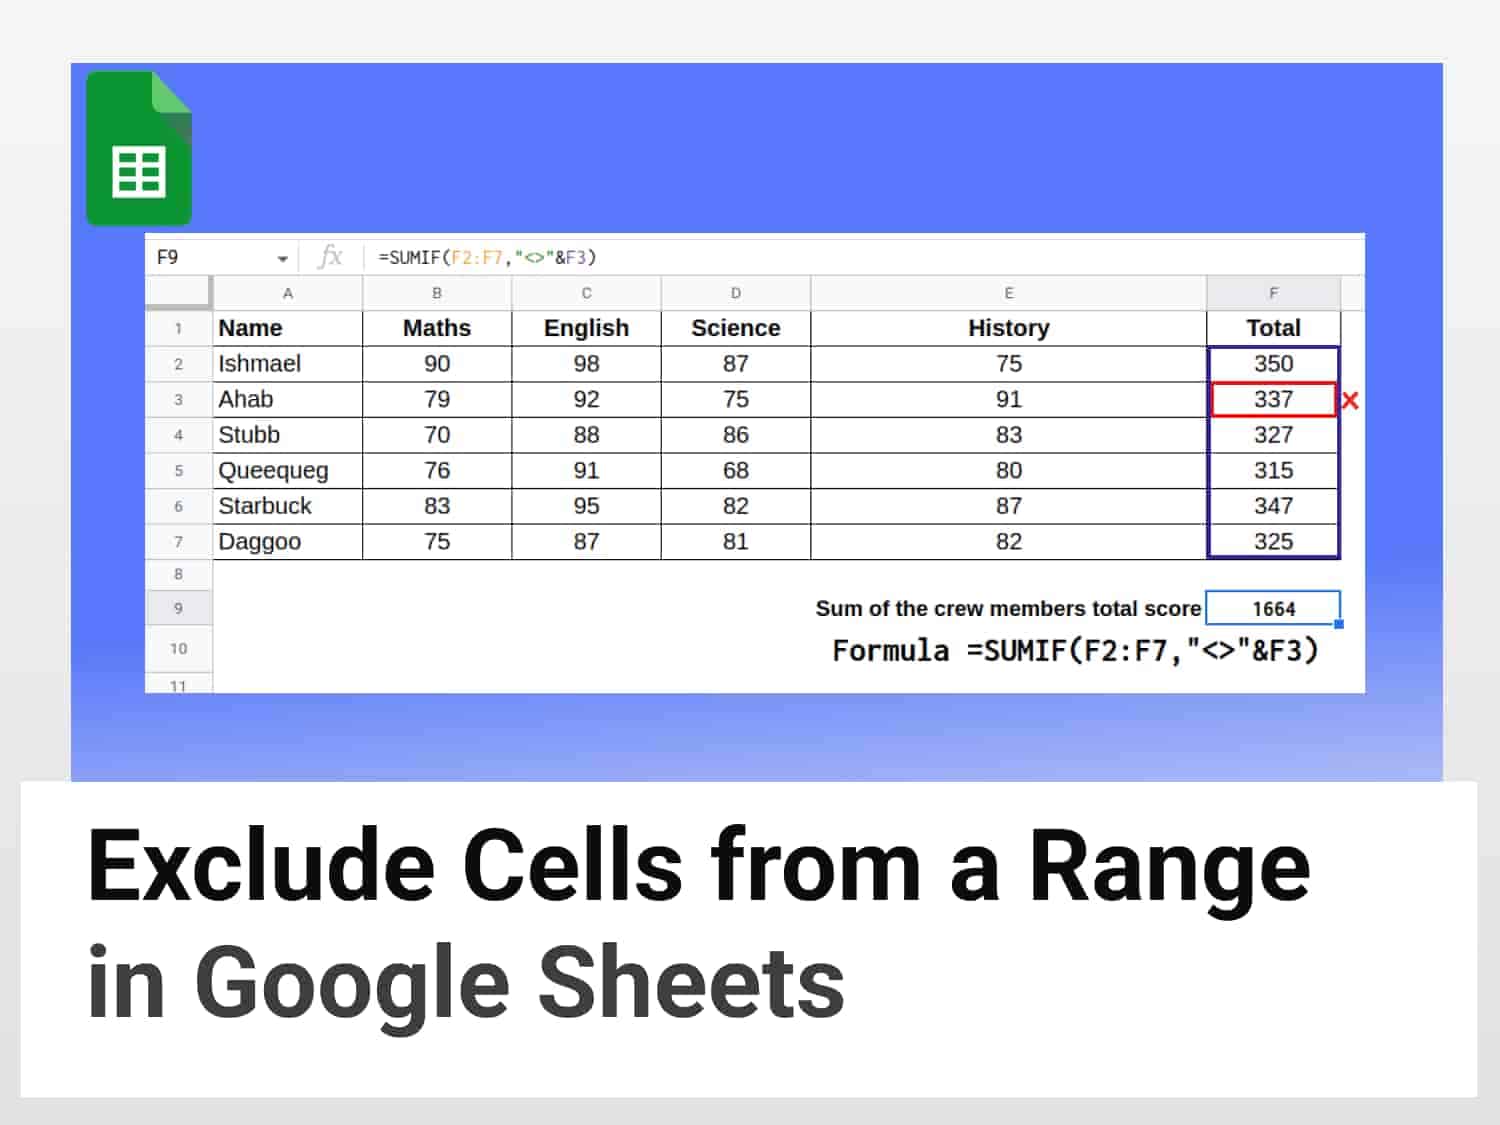 How to exclude a cell from a range in Google Sheets